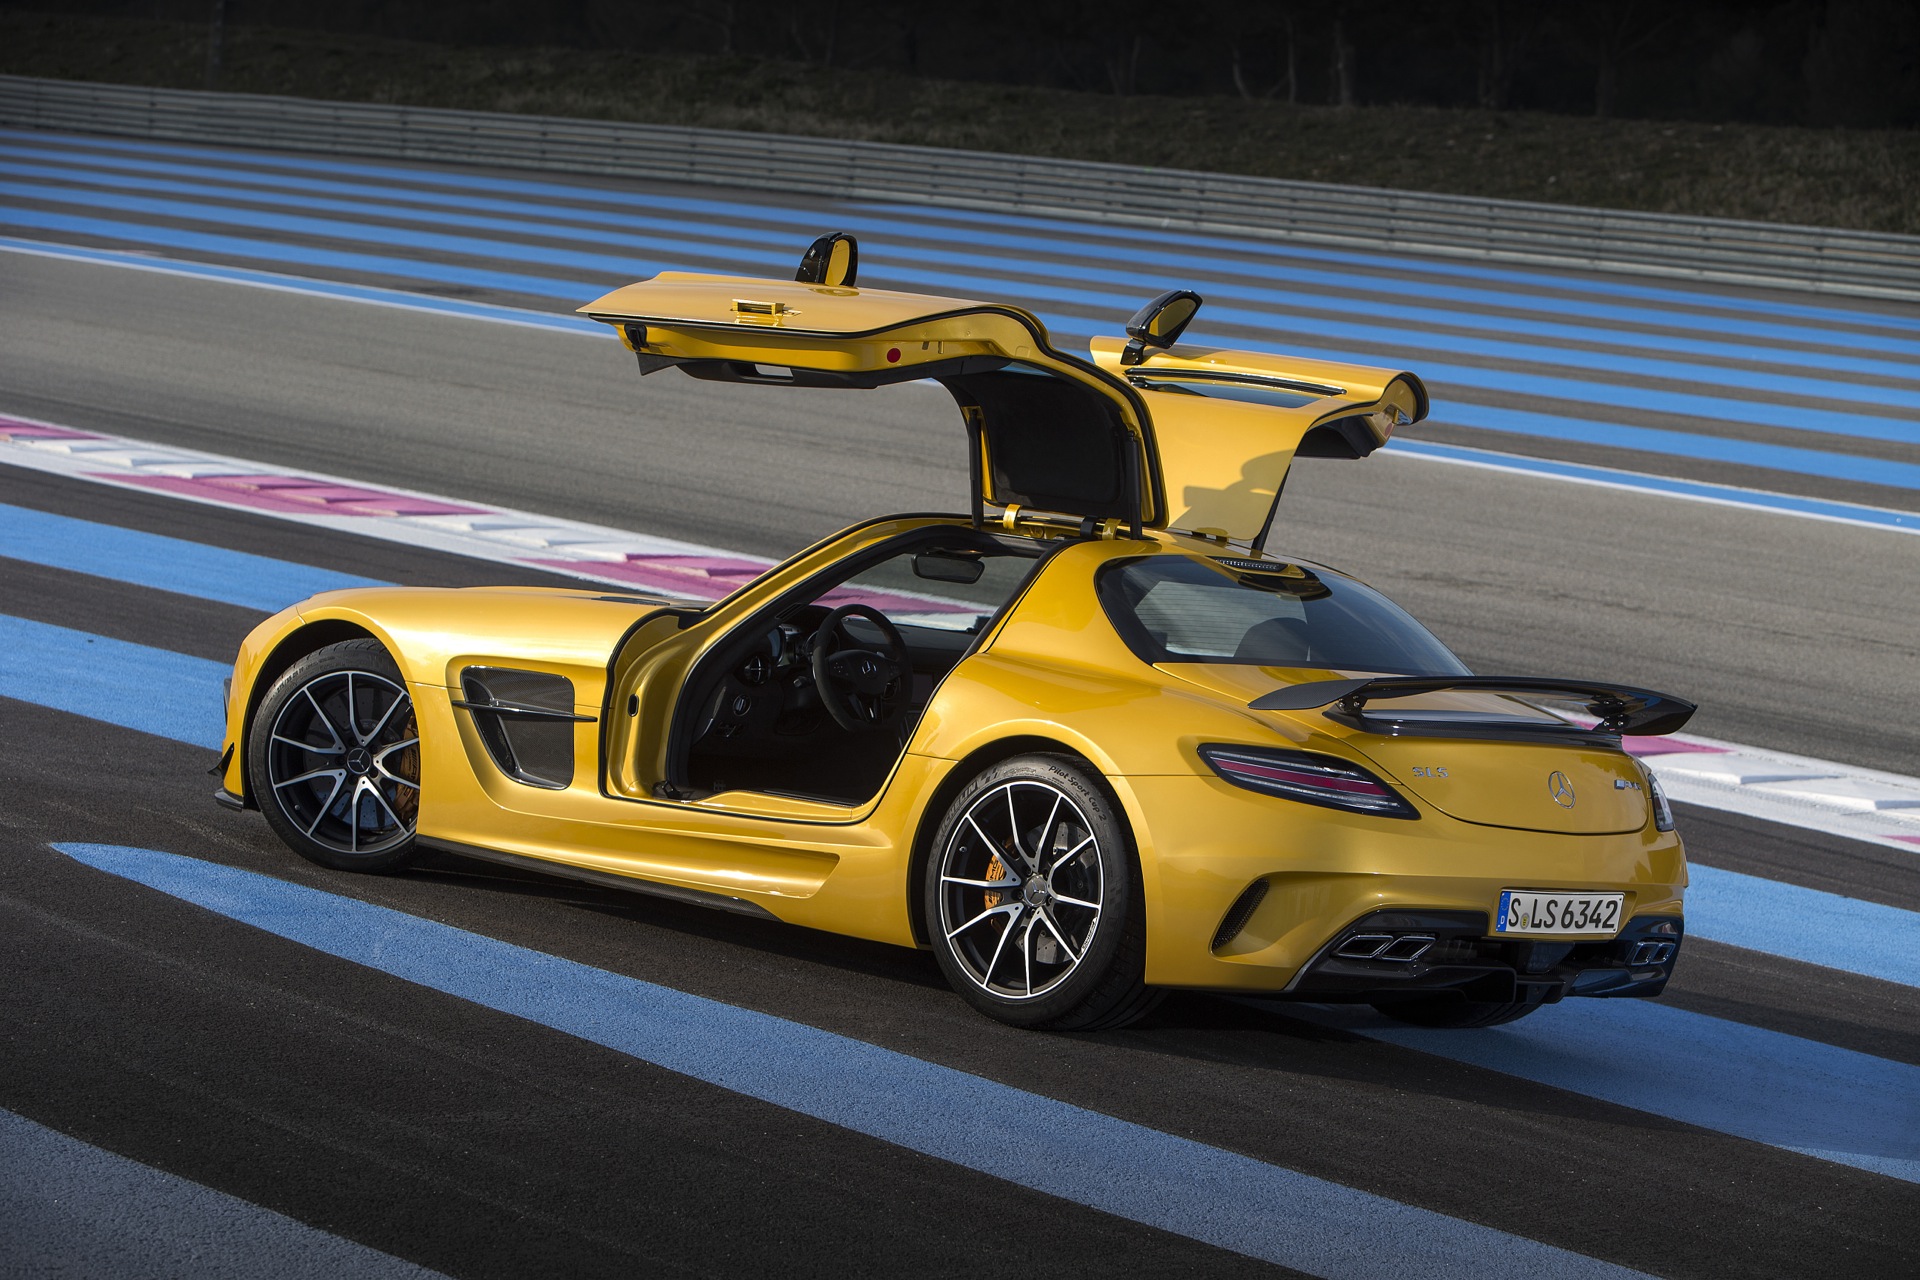 Mercedes-Benz Will Replace The SLS AMG, Just Not Right Away1920 x 1280